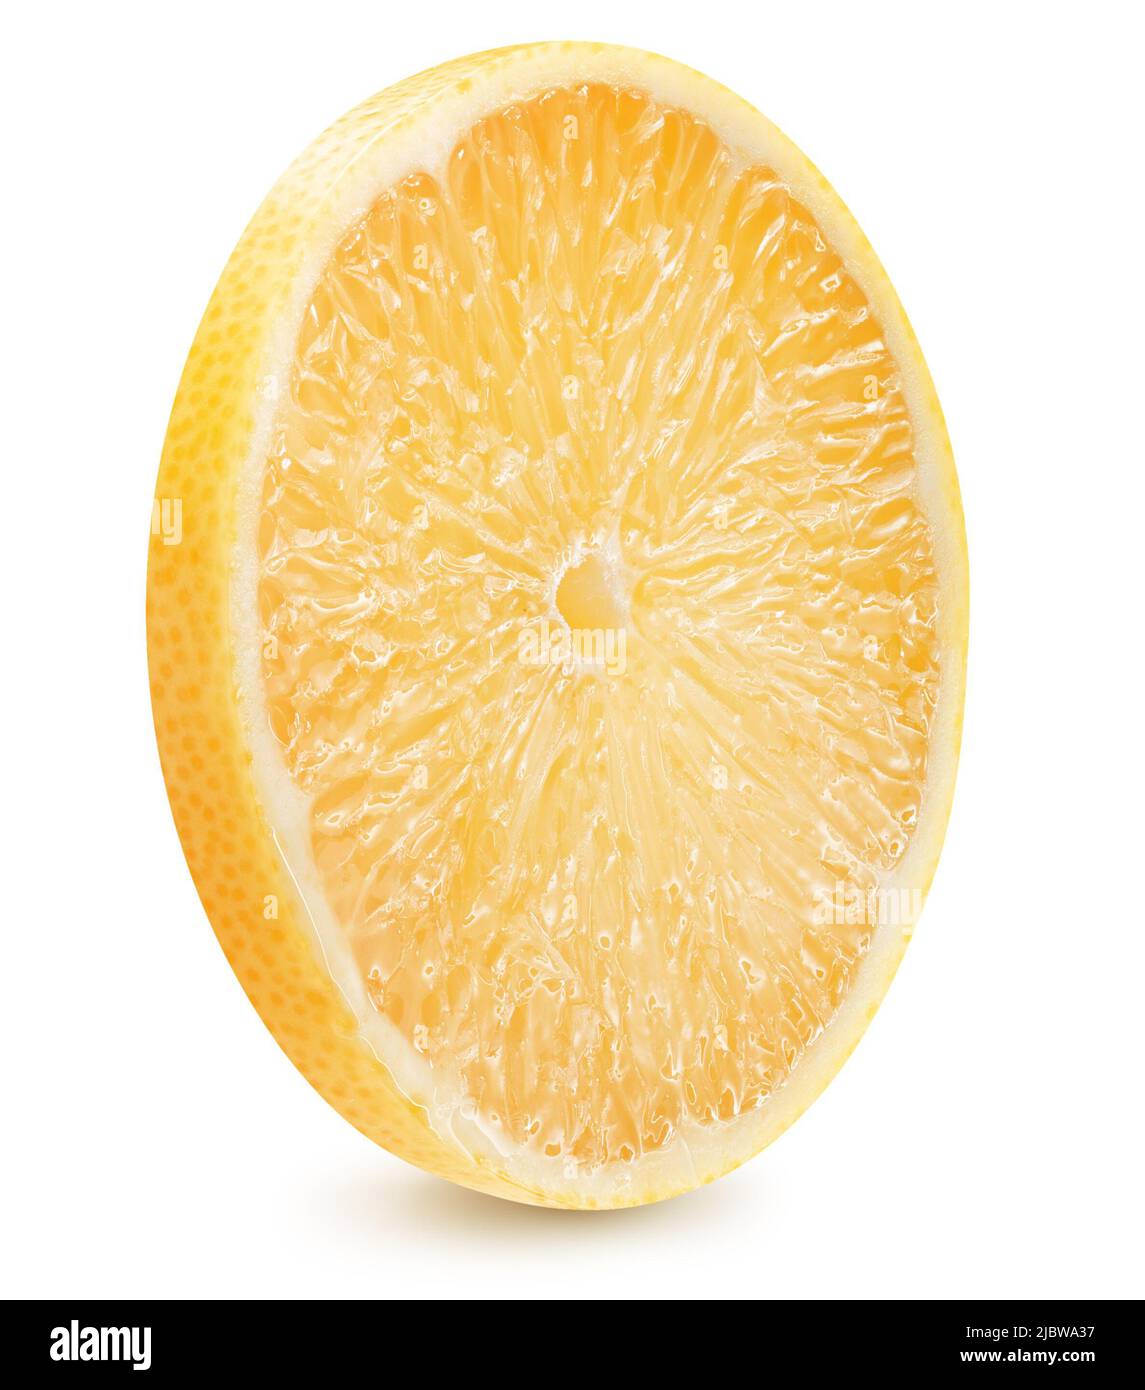 lemon slice isolated on a white background with clipping path. Stock Photo